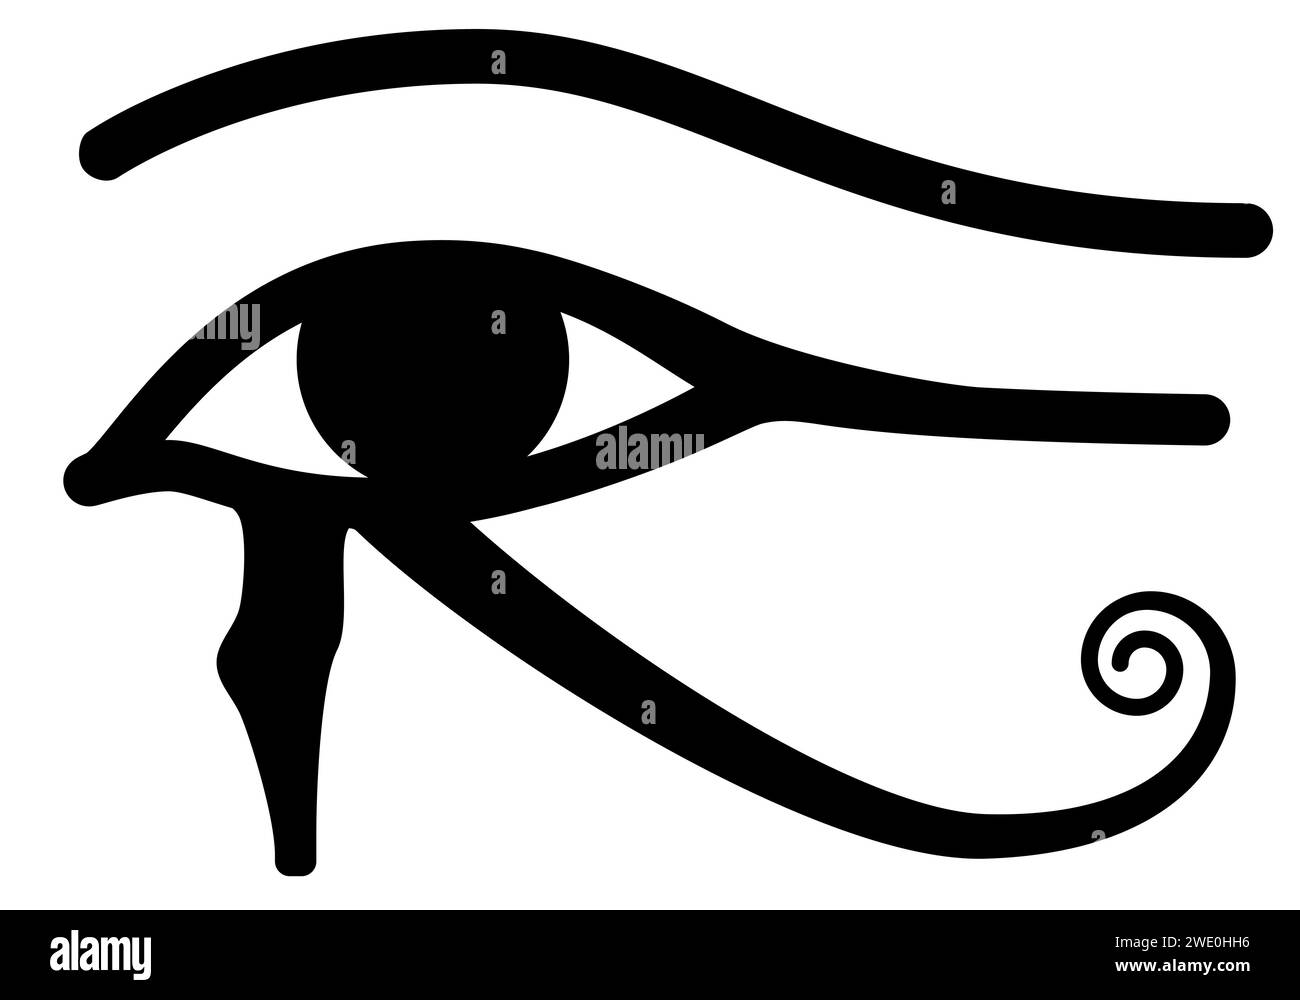 Eye Of Horus Black And White Vector Silhouette Illustration Of Ancient Egyptian Hieroglyphic